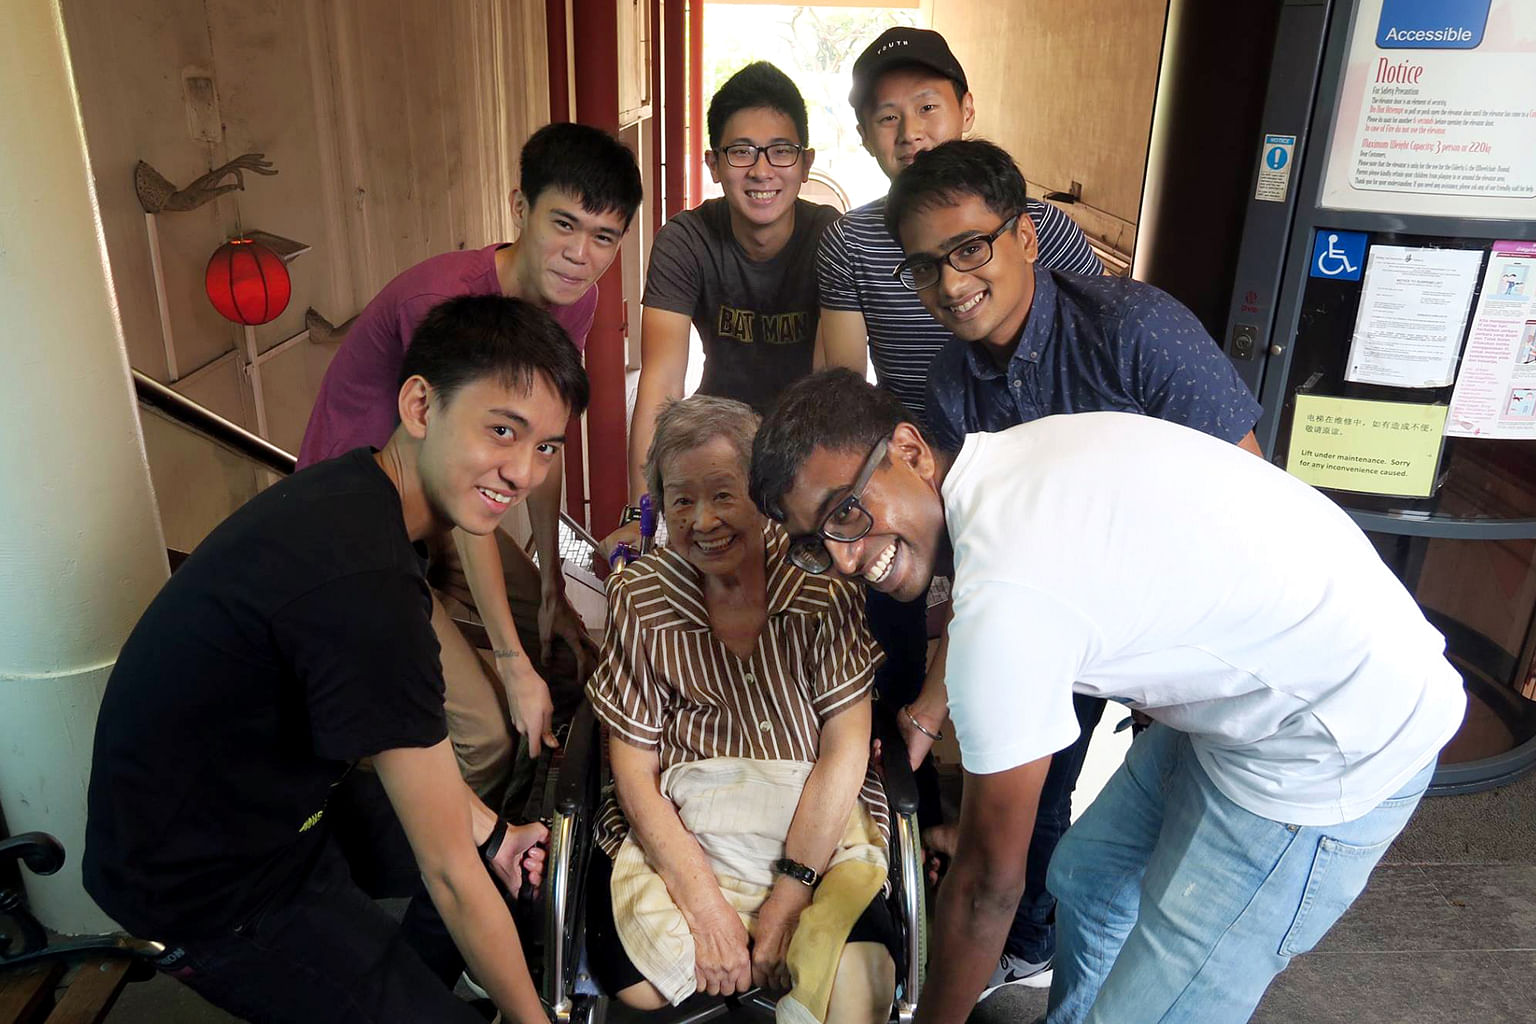 Giving Madam Loh's mother-in-law a lift up the stairs to the restaurant are (from left) Lance Cpl Wong, Pte Ng, Pte Ko, Lance Cpl Teo, 3SG Singh and MSG Johan.